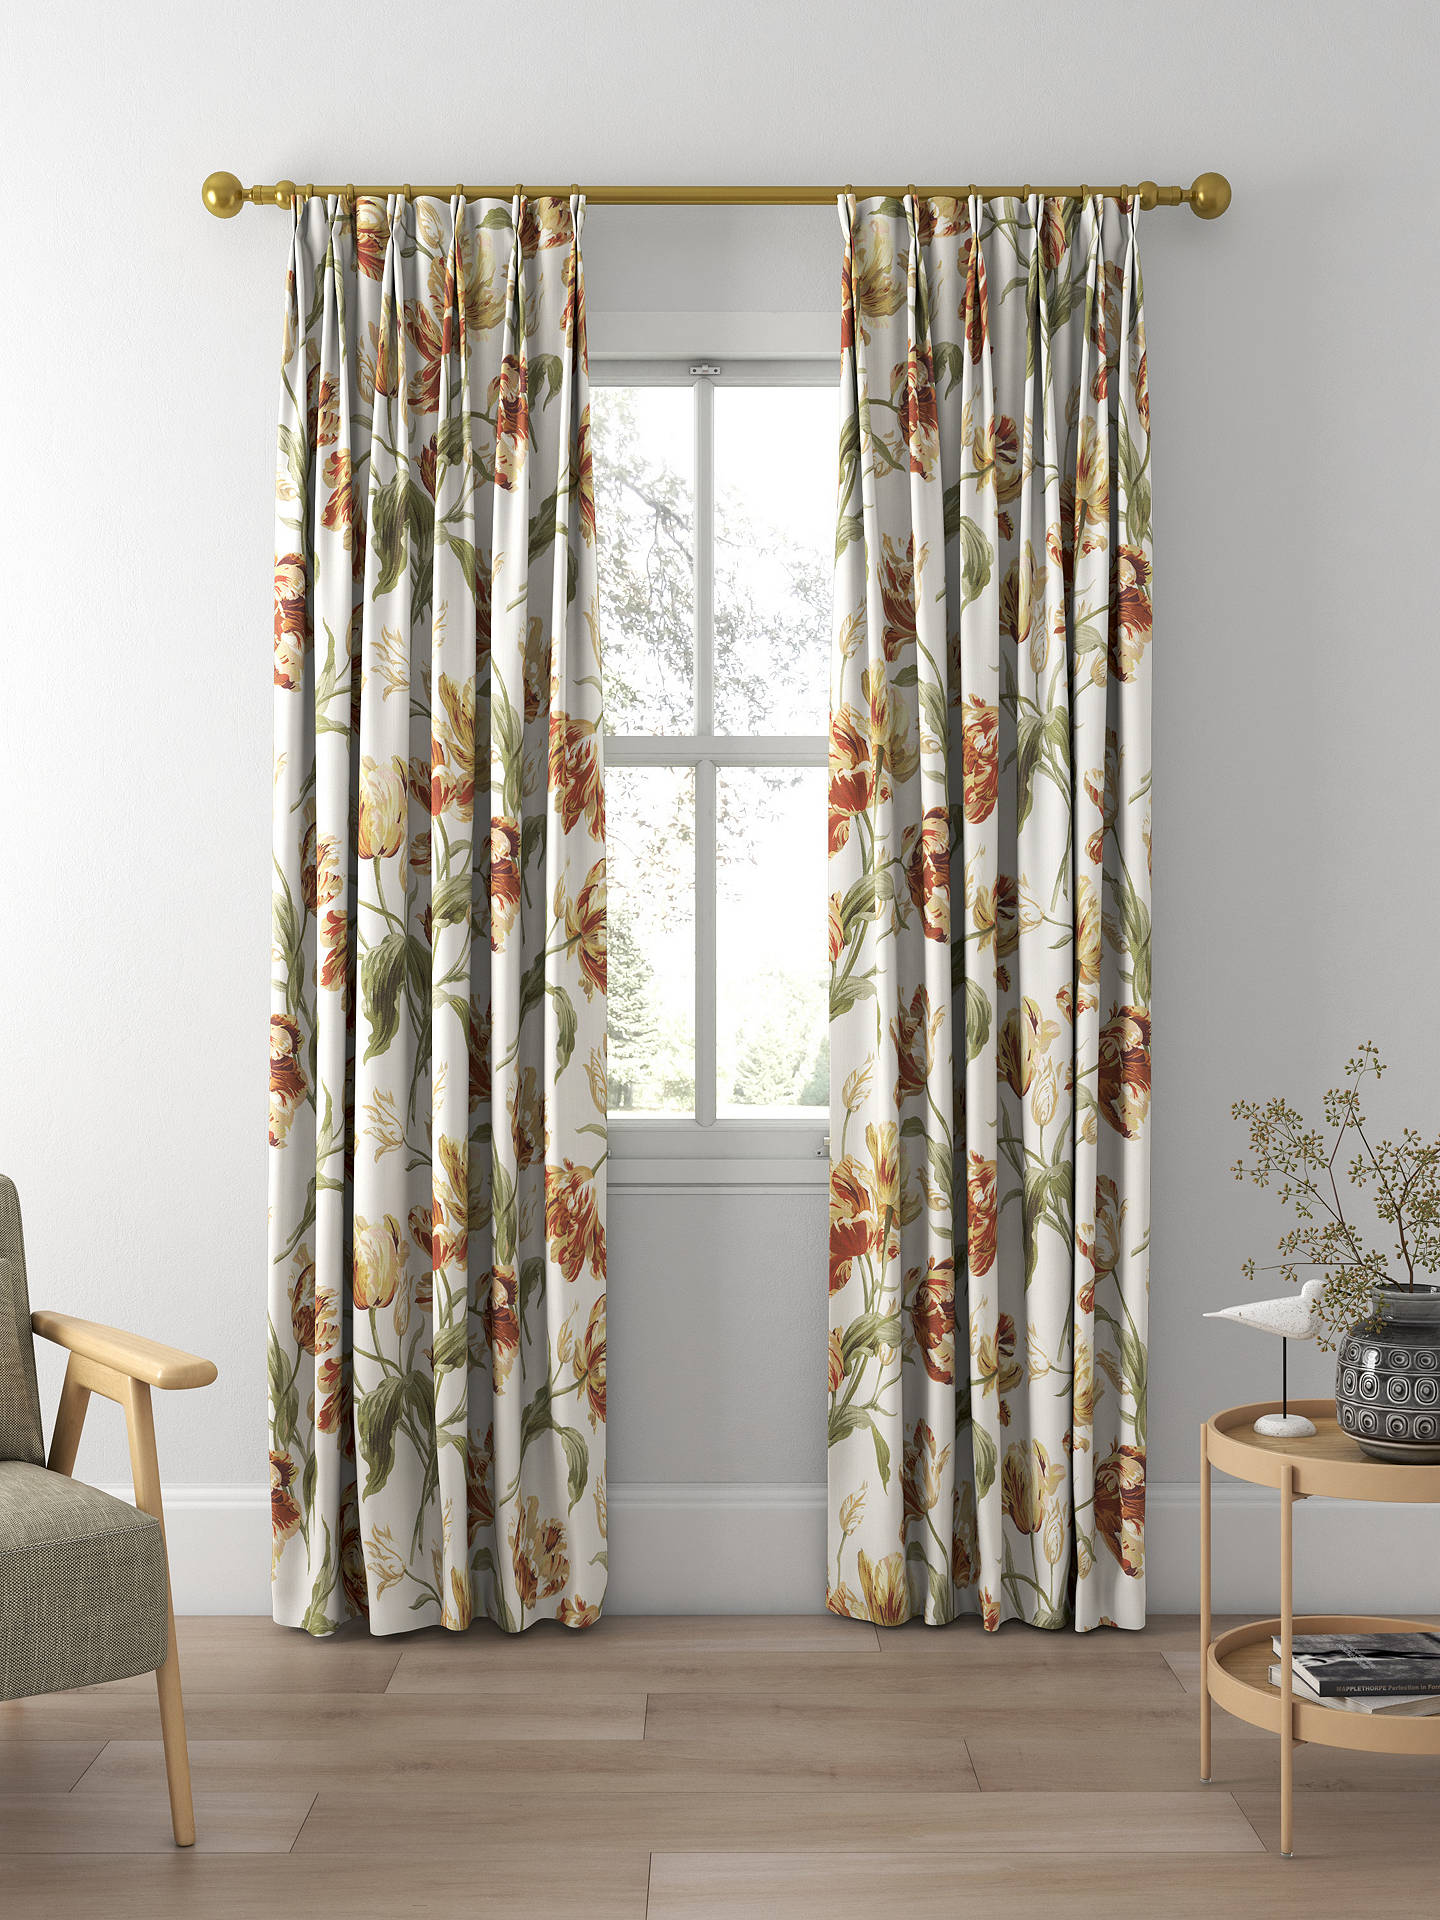 Laura Ashley Gosford Meadow Made to Measure Curtains, Gold